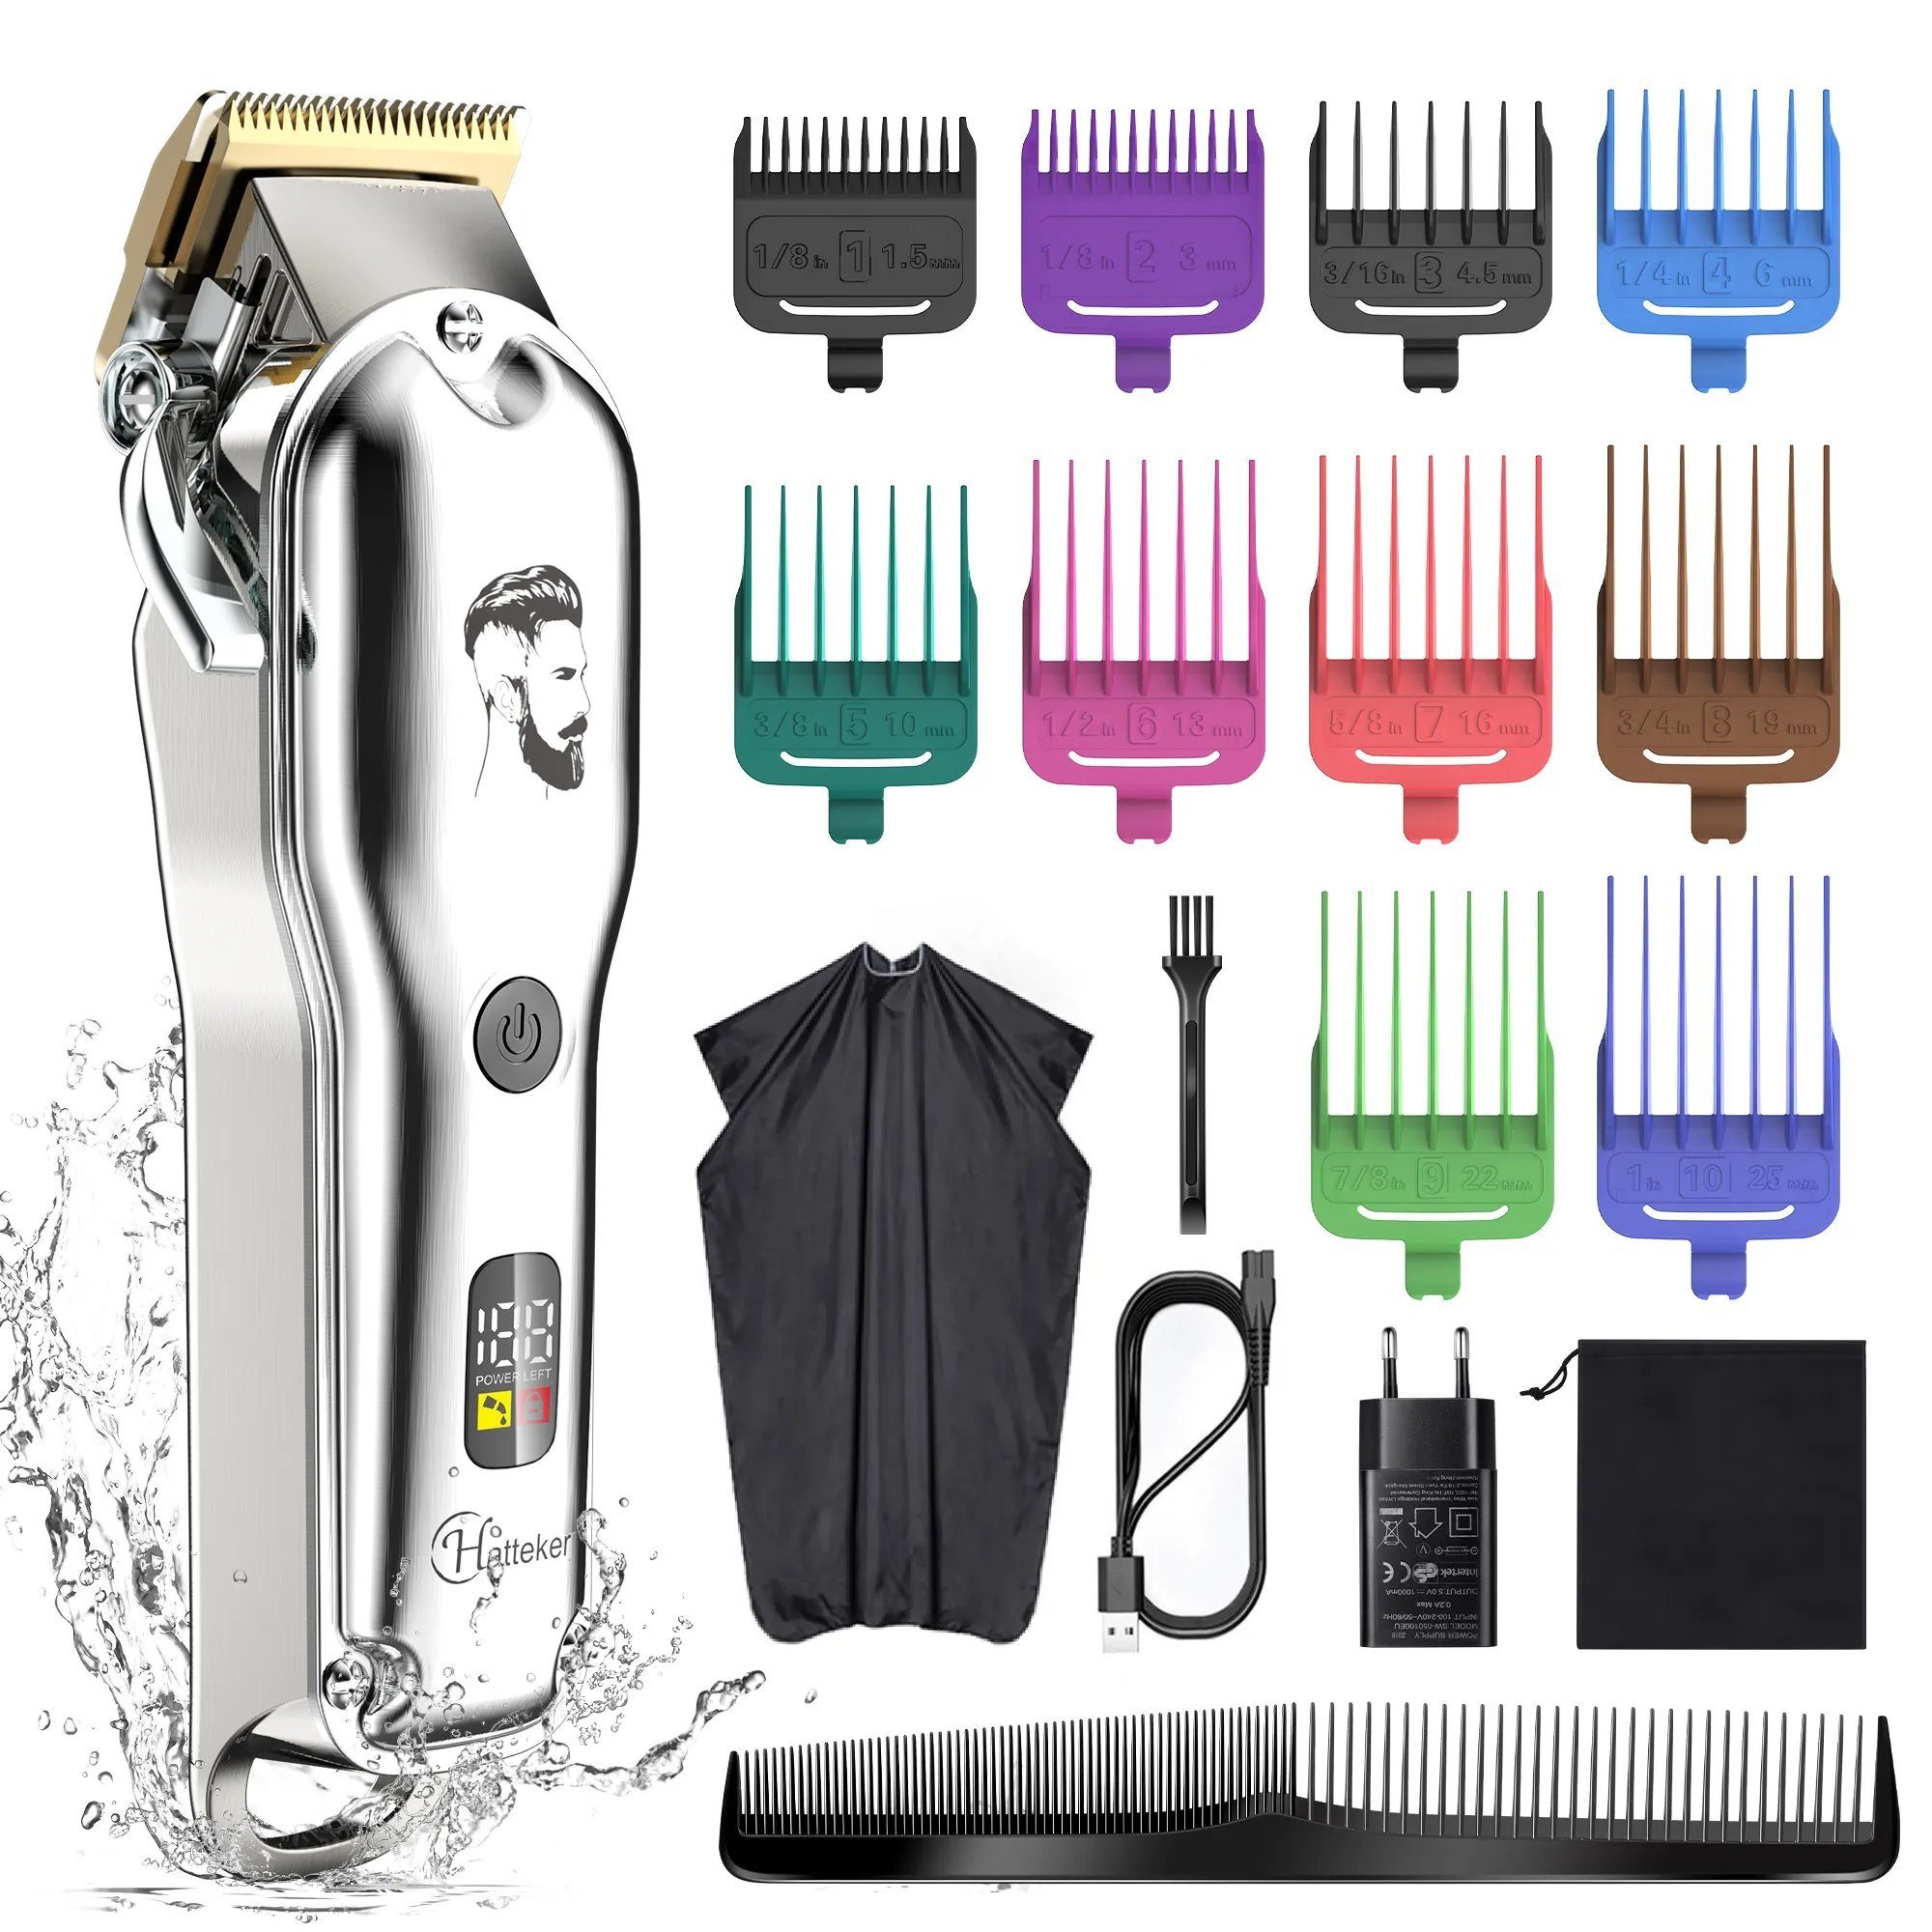 HATTEKER Beauty-Trimmer Professional Barbers Grooming Kit Colorful Clippers, Vollständig Rechargeable, Hair 2000 waschbar mAh, Combs